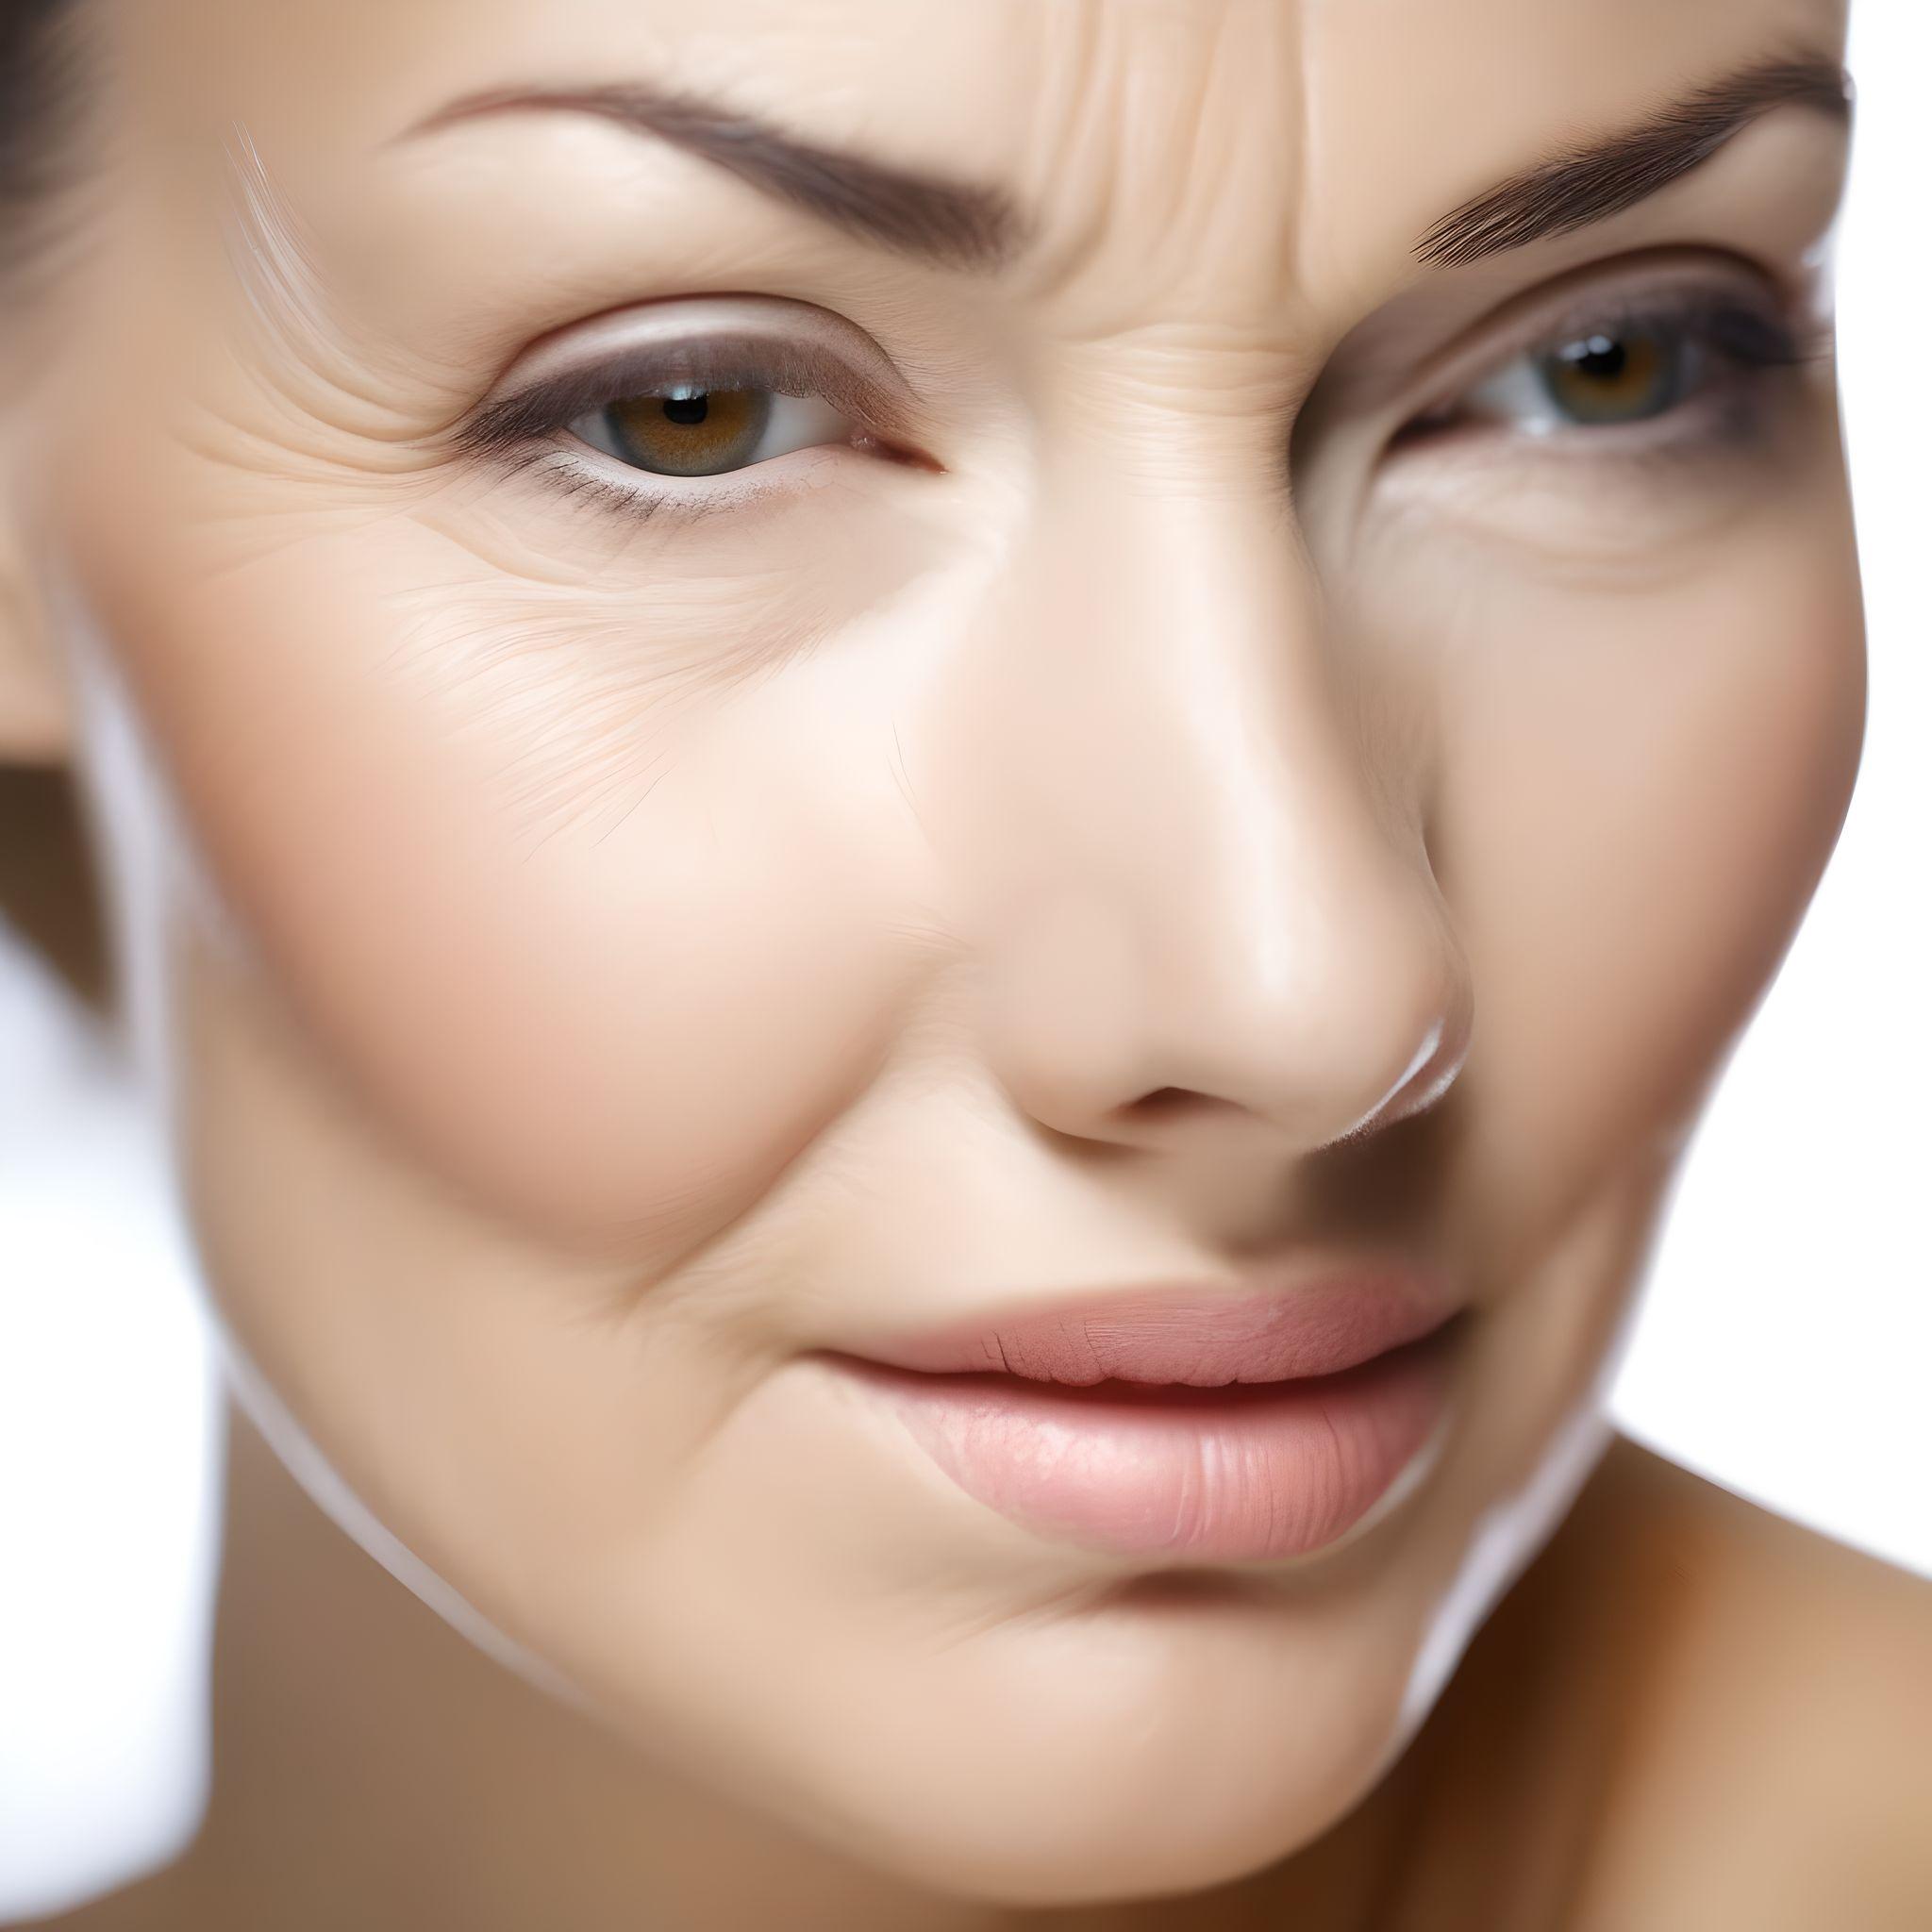 10 Causes of Facial Wrinkles and their Treatment